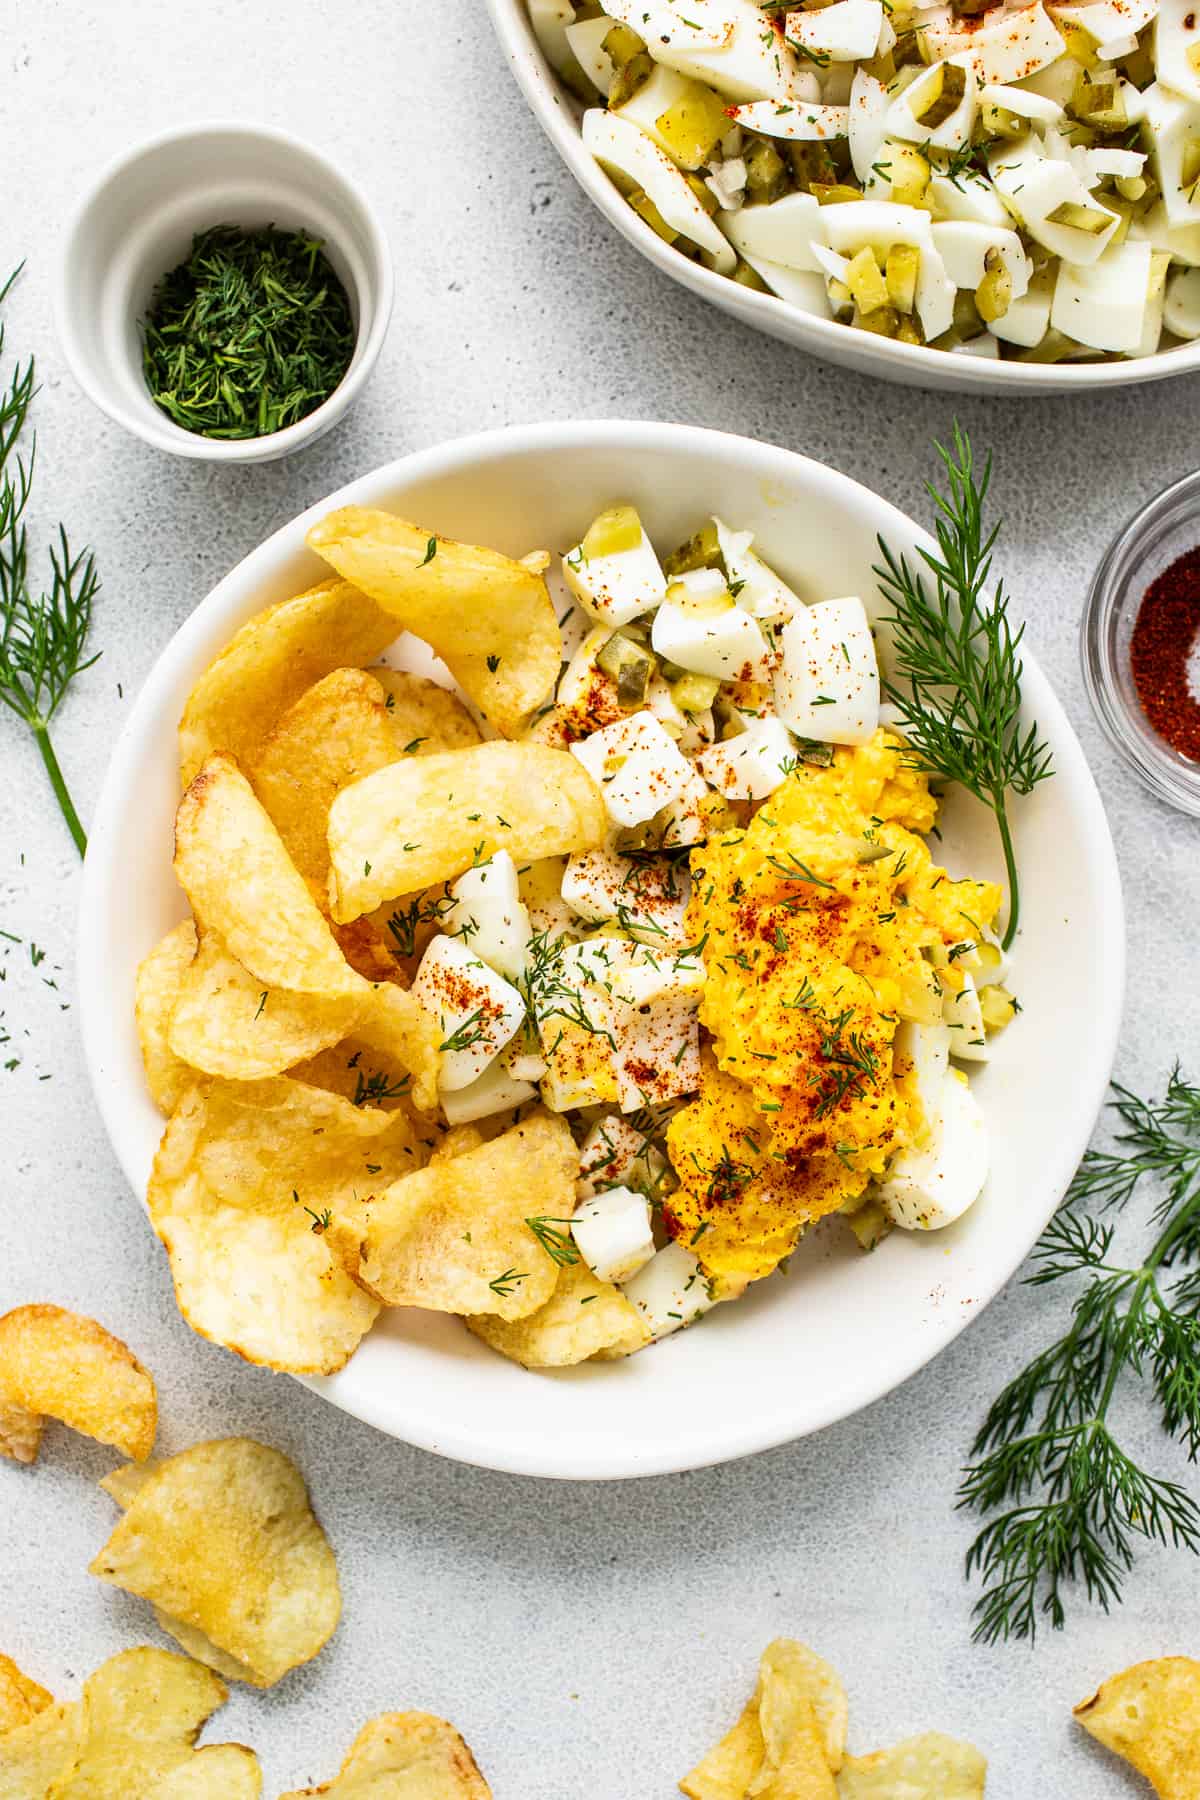 Deviled egg salad in a bowl with potato chips.